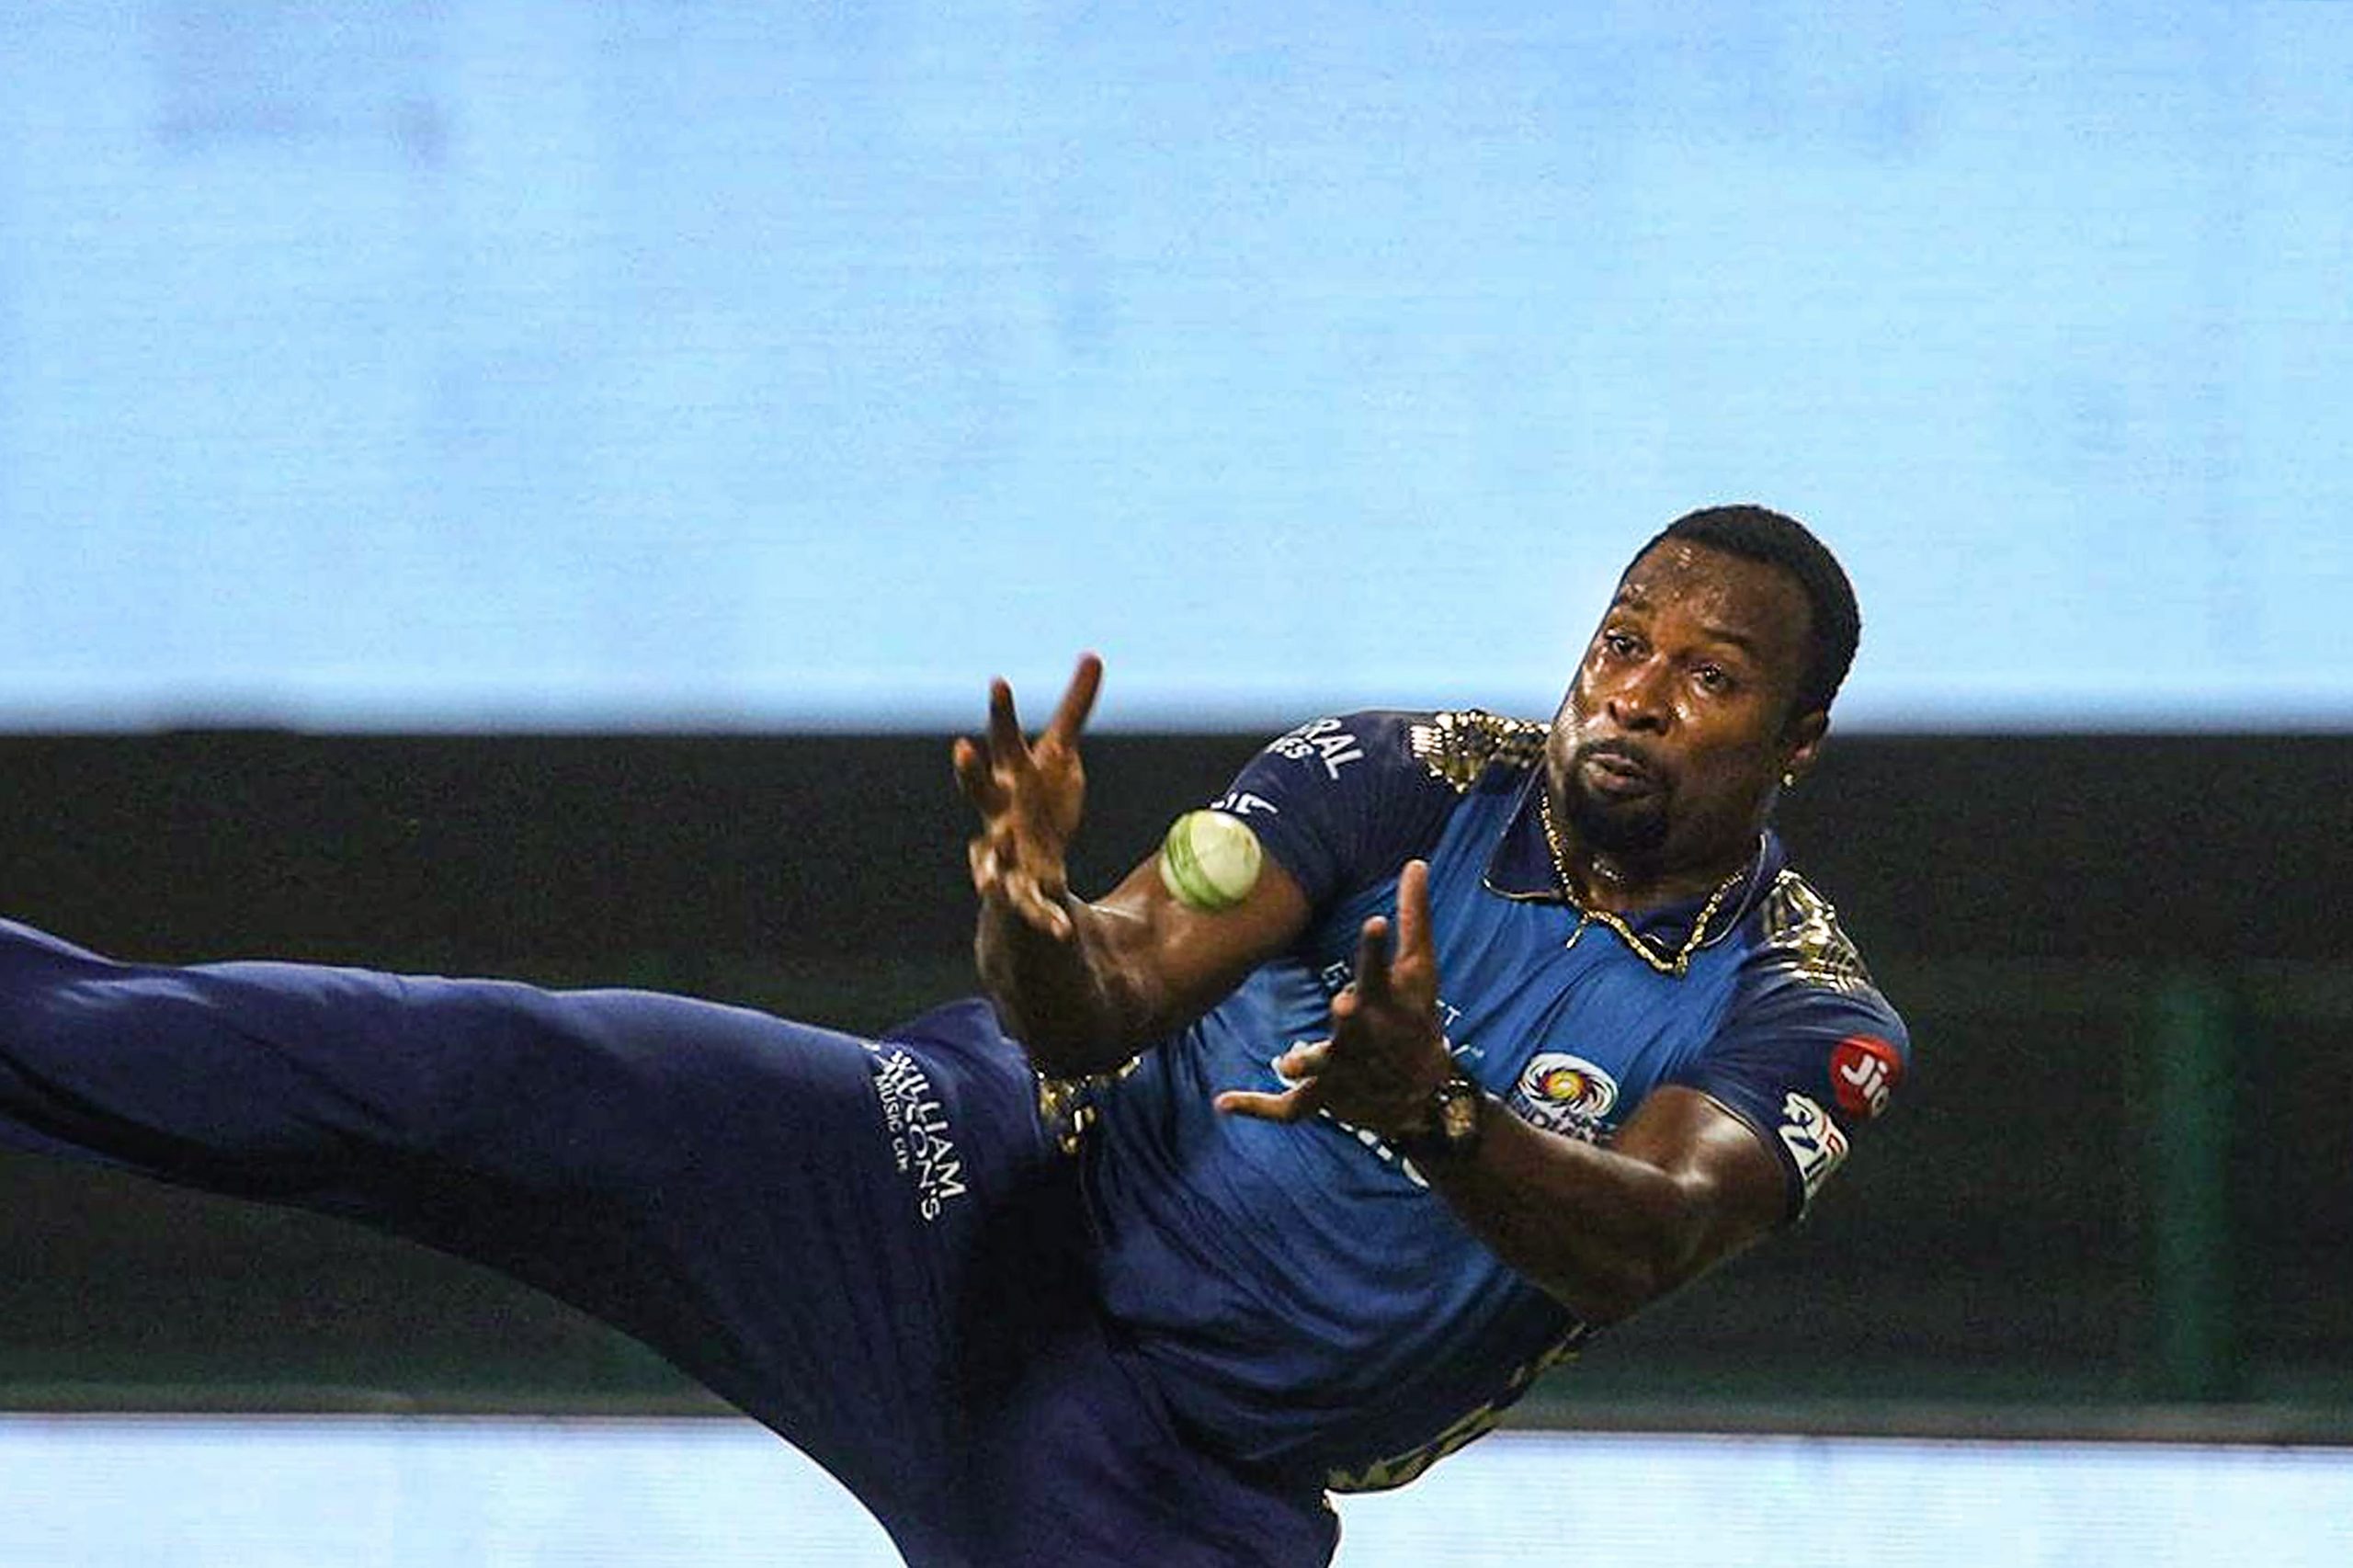 CPL 2021: Kieron Pollard protests against umpire’s decision over wide call